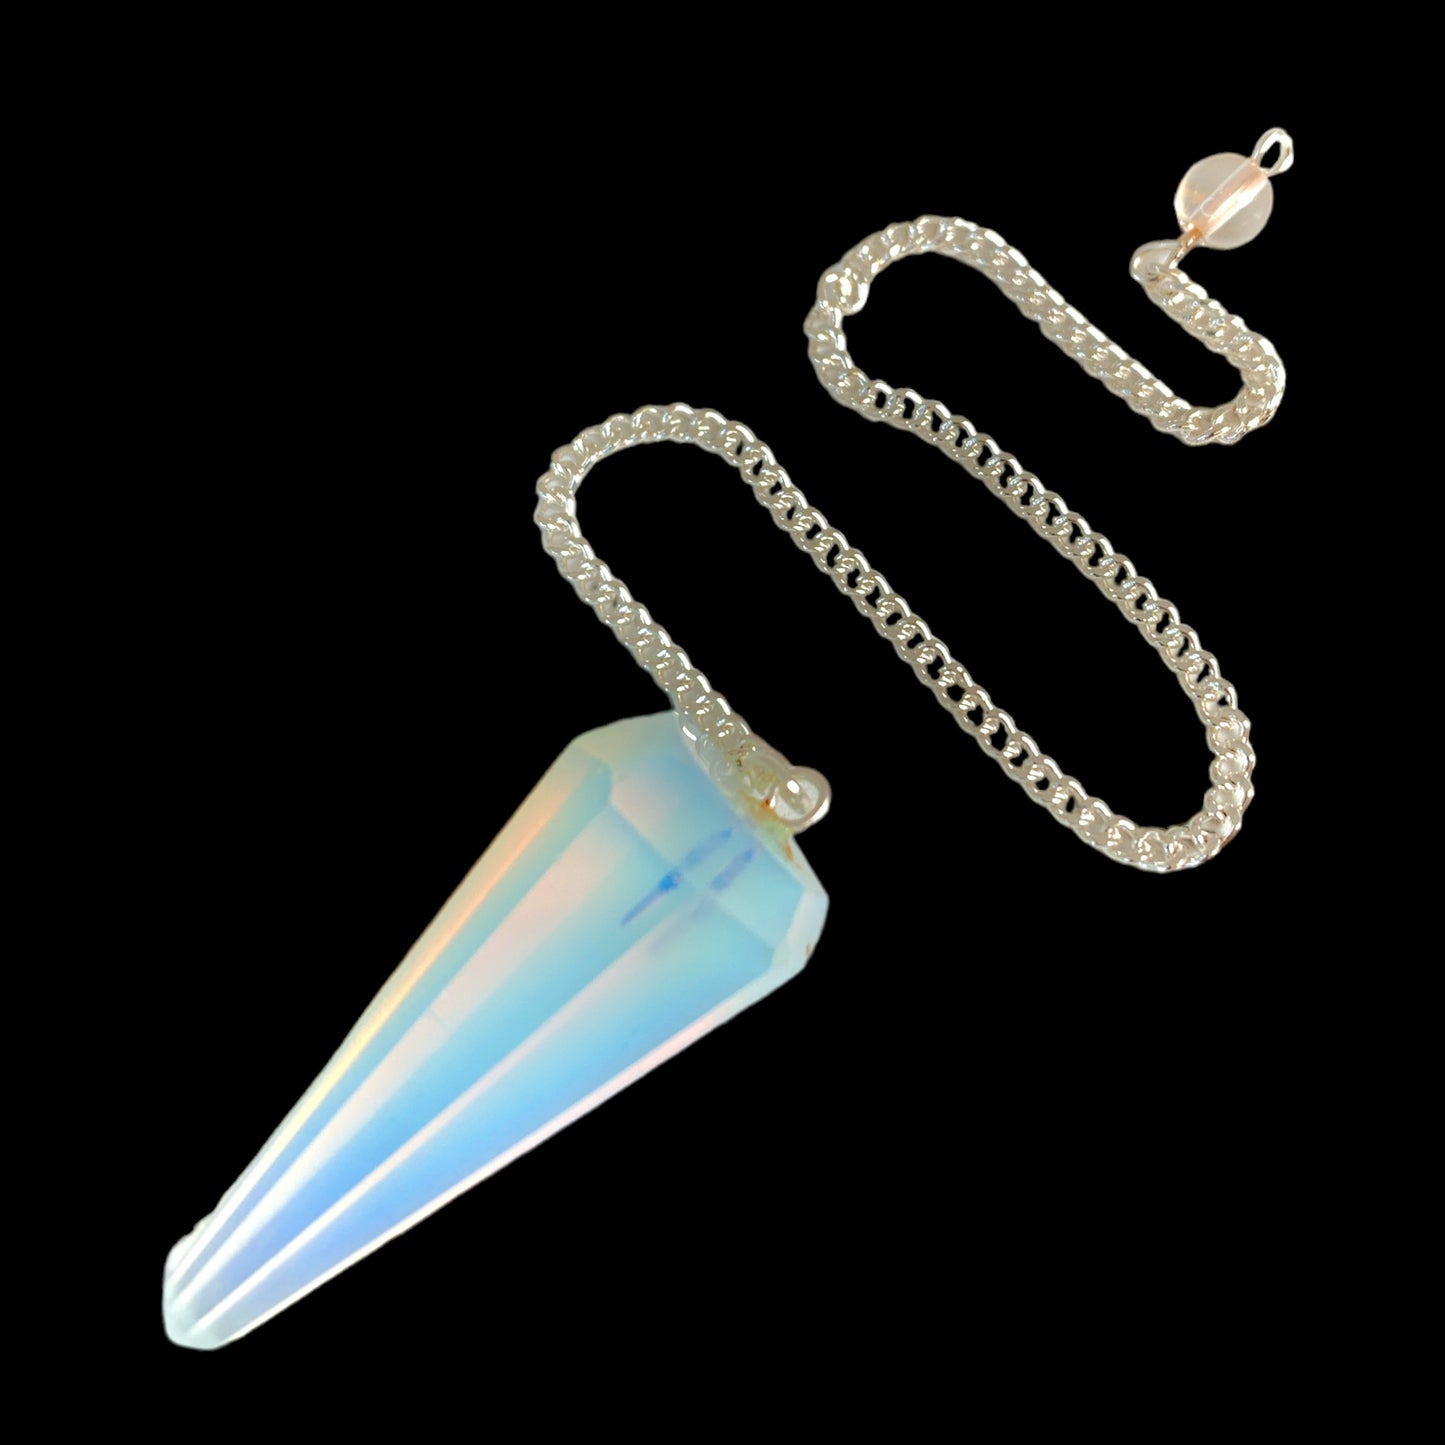 Opalite 8 Facet Pendulum - 35-45mm - 20g - NEW422 - Synthetic